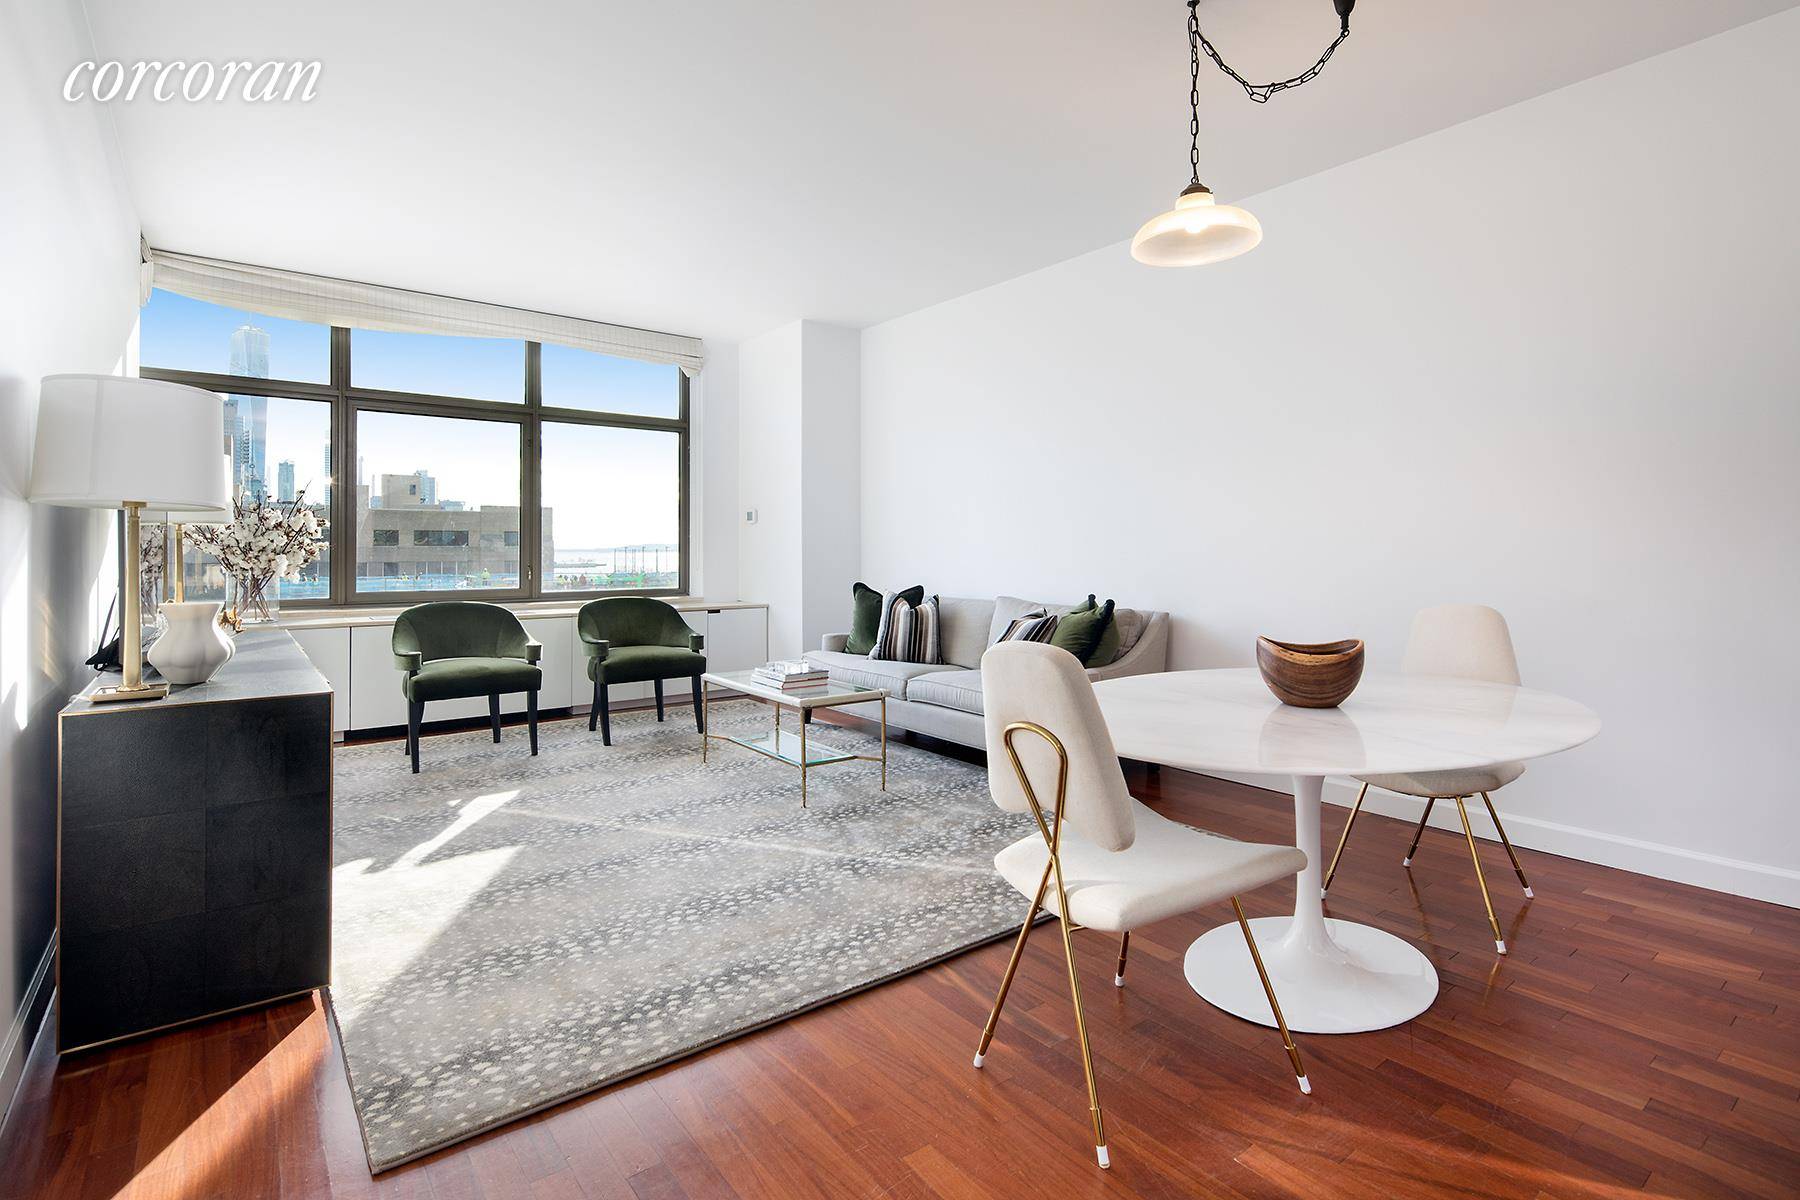 One Morton Square is one of the finest full service residential buildings in the West Village.